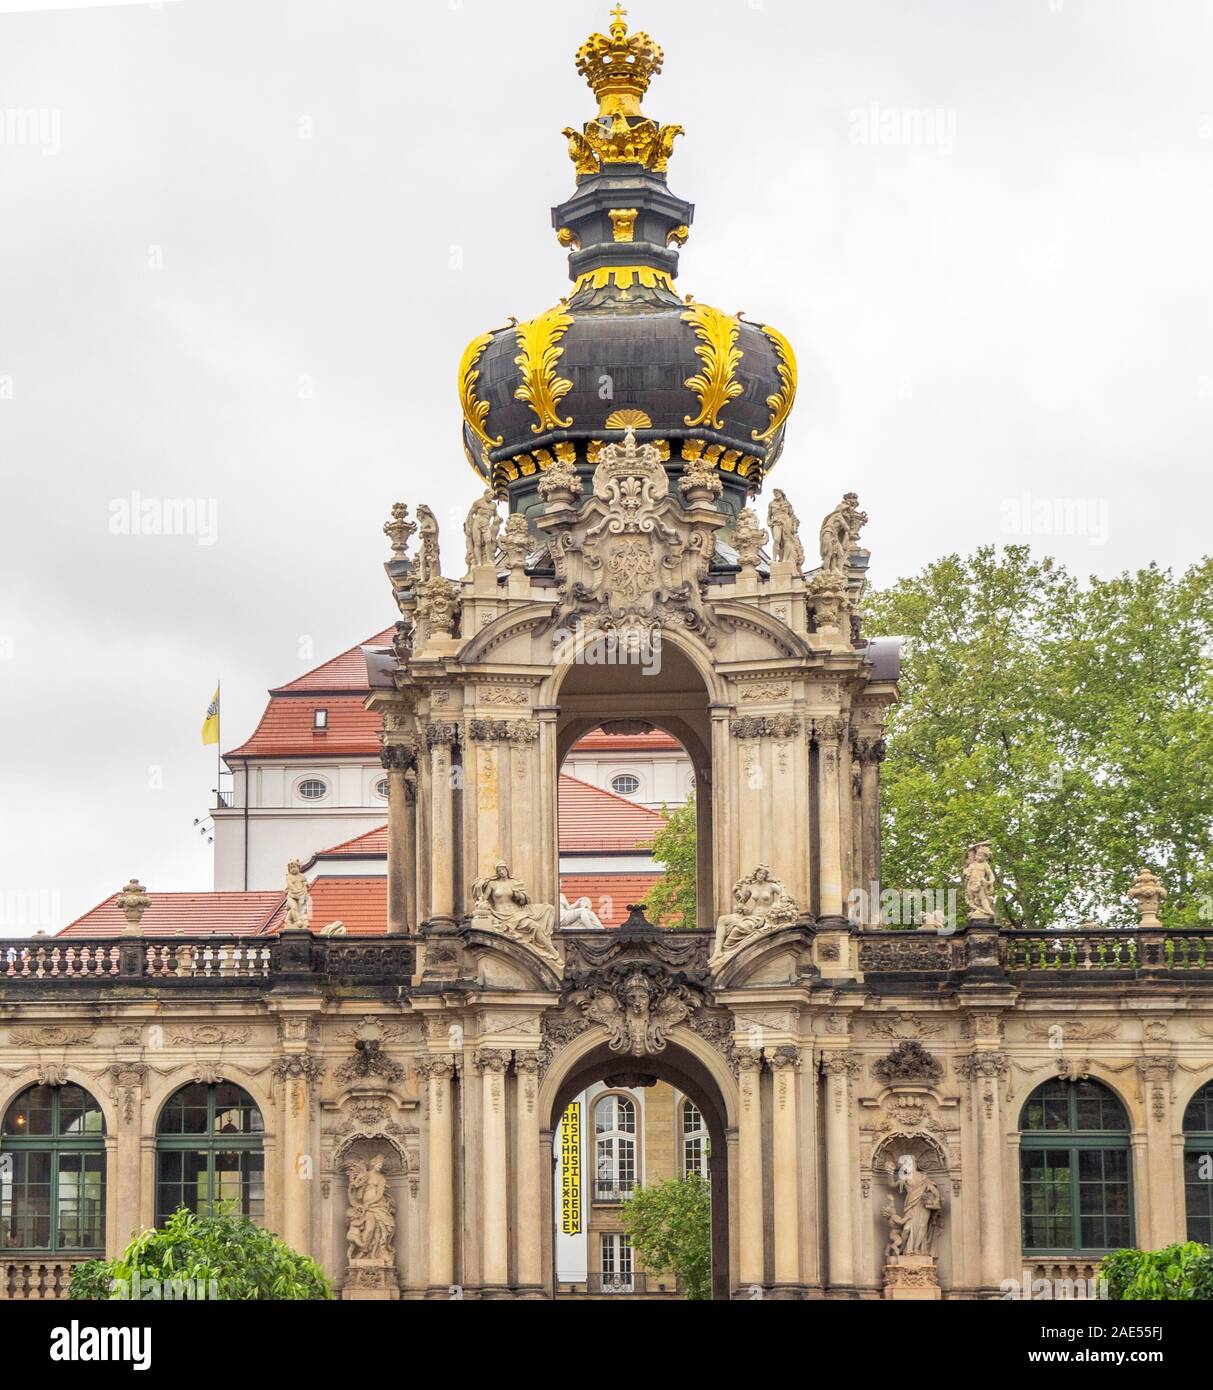 Baroque Gilded Kronentor crown gateway at Dresdner Zwinger Dresden Saxony Germany. Stock Photo